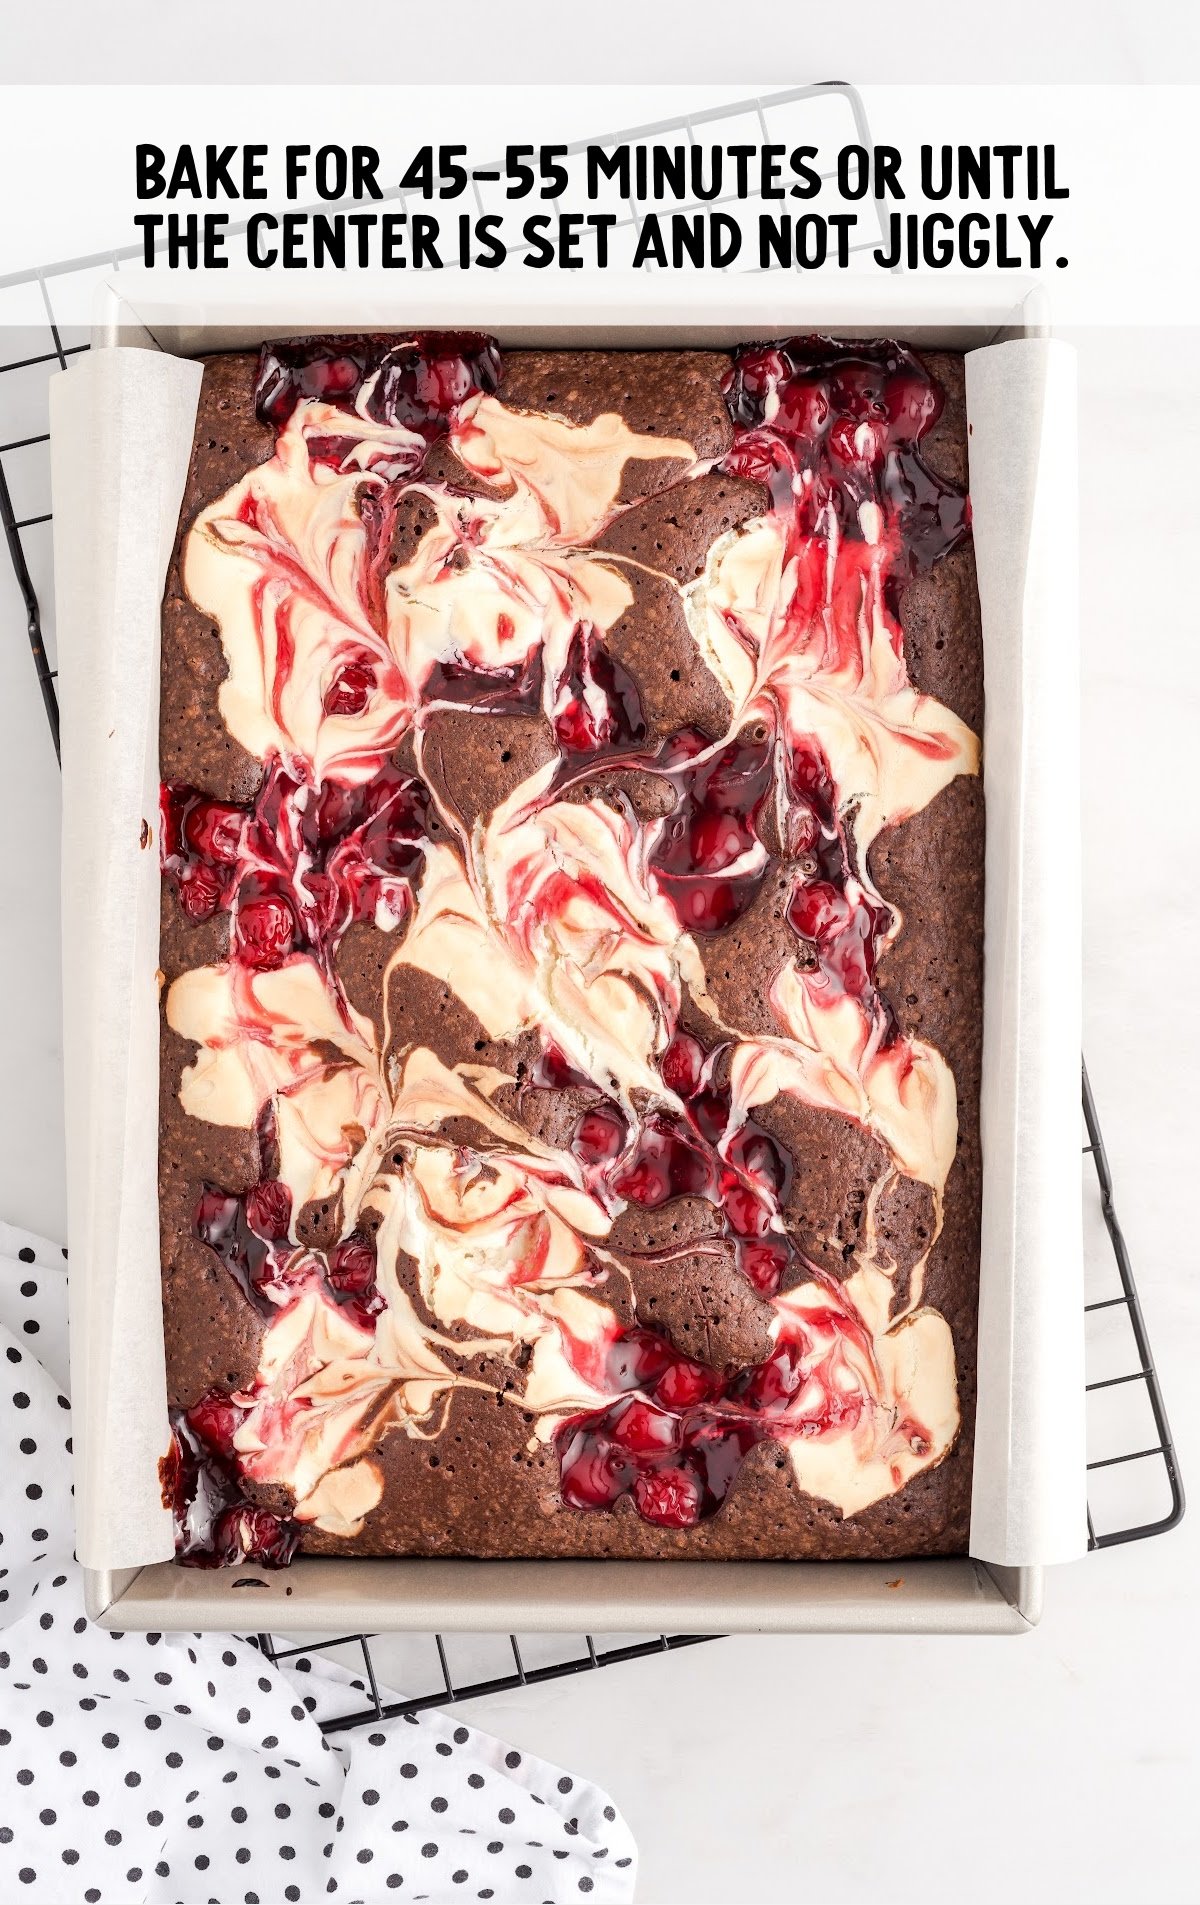 cheesecake brownie baked to 40-45 minutes 